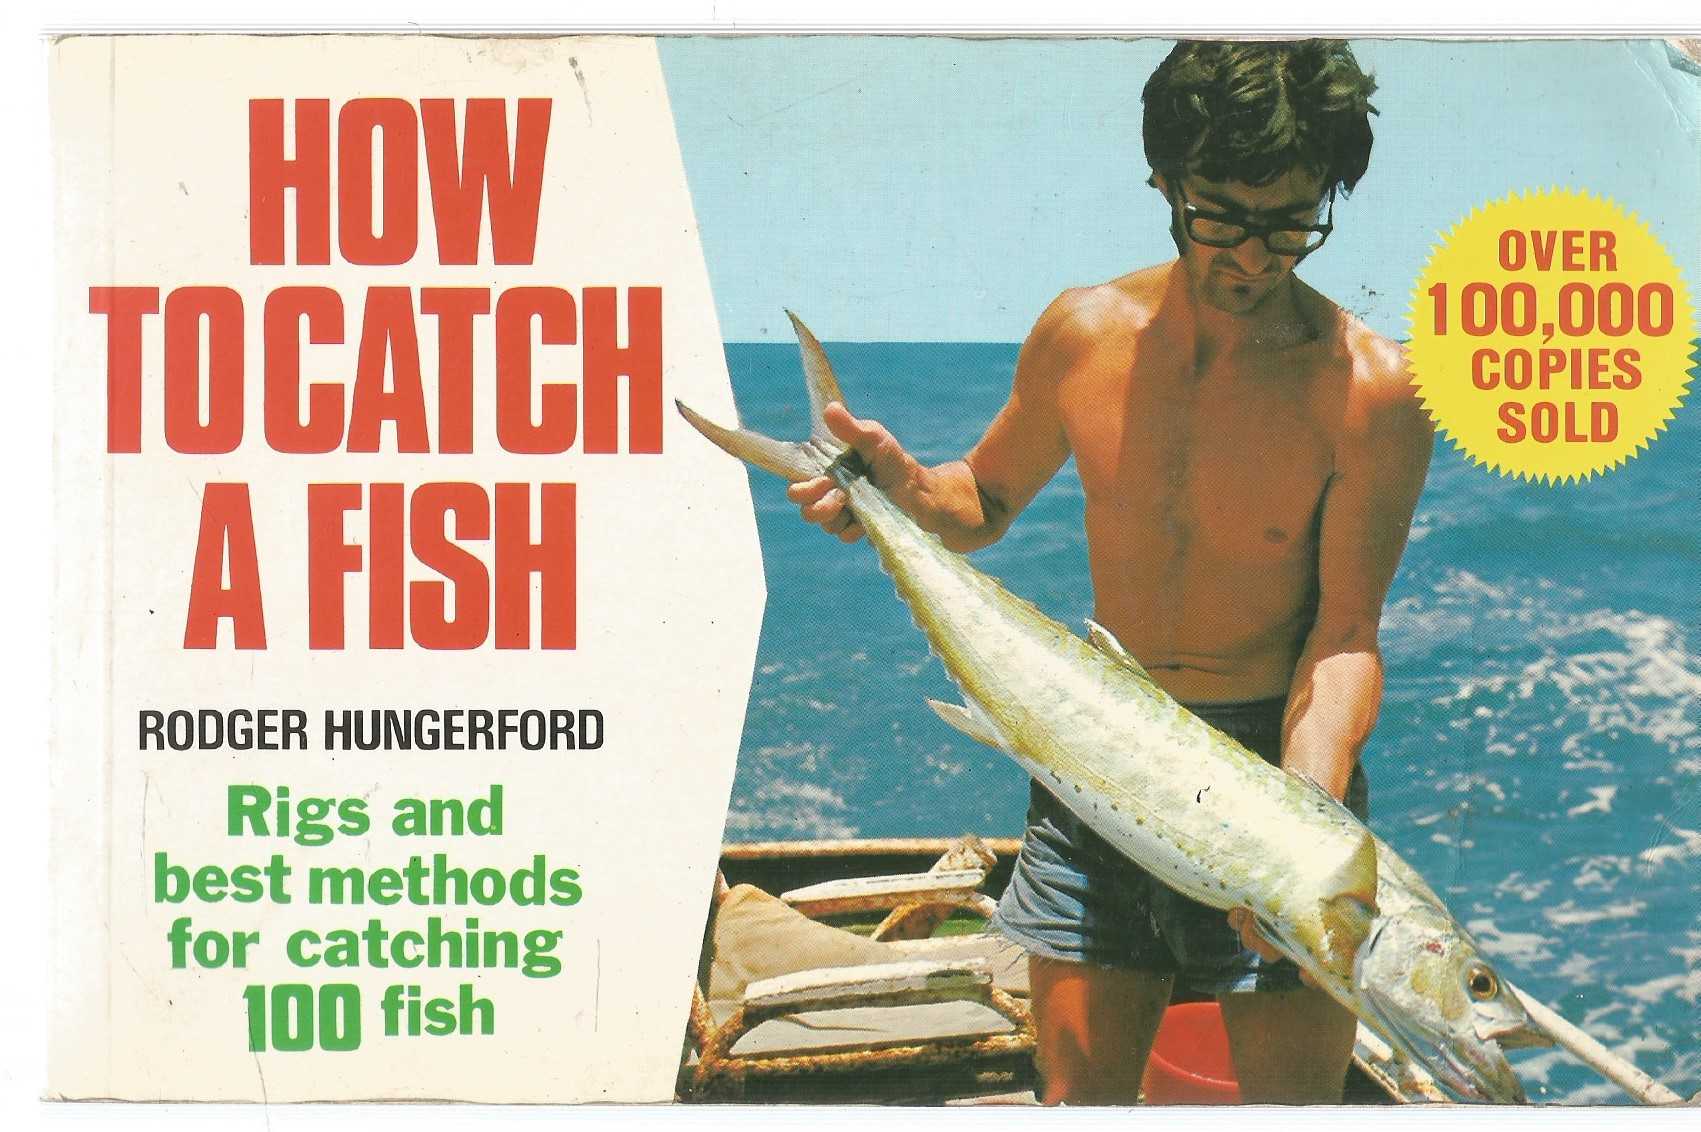 How to Catch a Fish - Rodger Hungerford